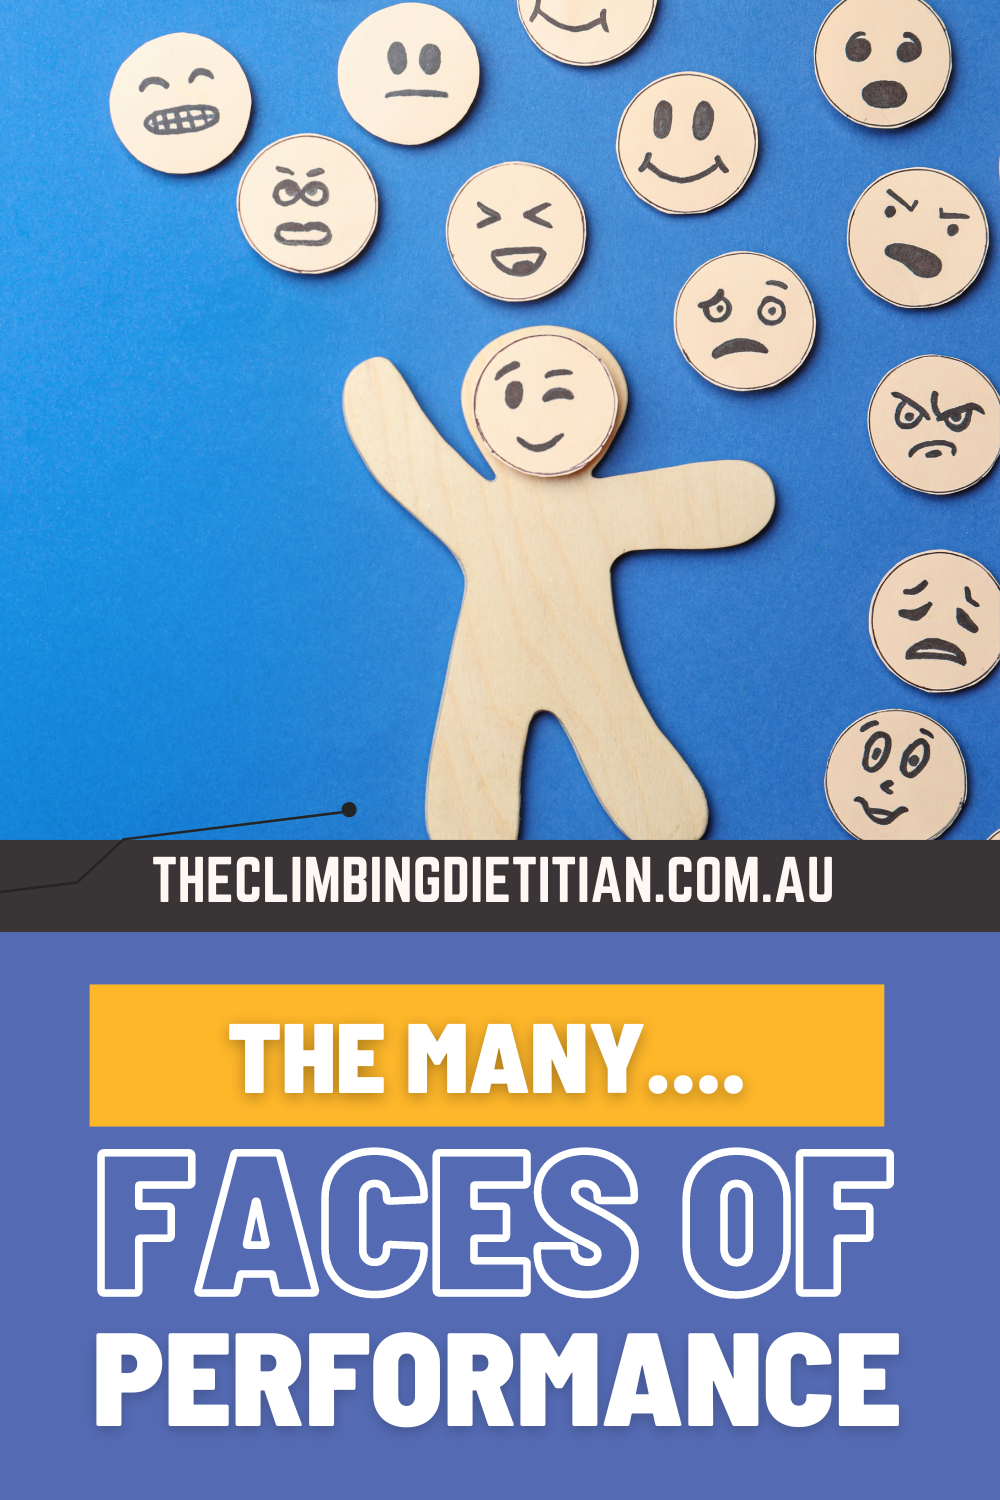 The Many Faces of Performance - Looking Beyond Just Sport-Brisbane Dietitian-Brisbane Sports Dietitian-Nutritionist